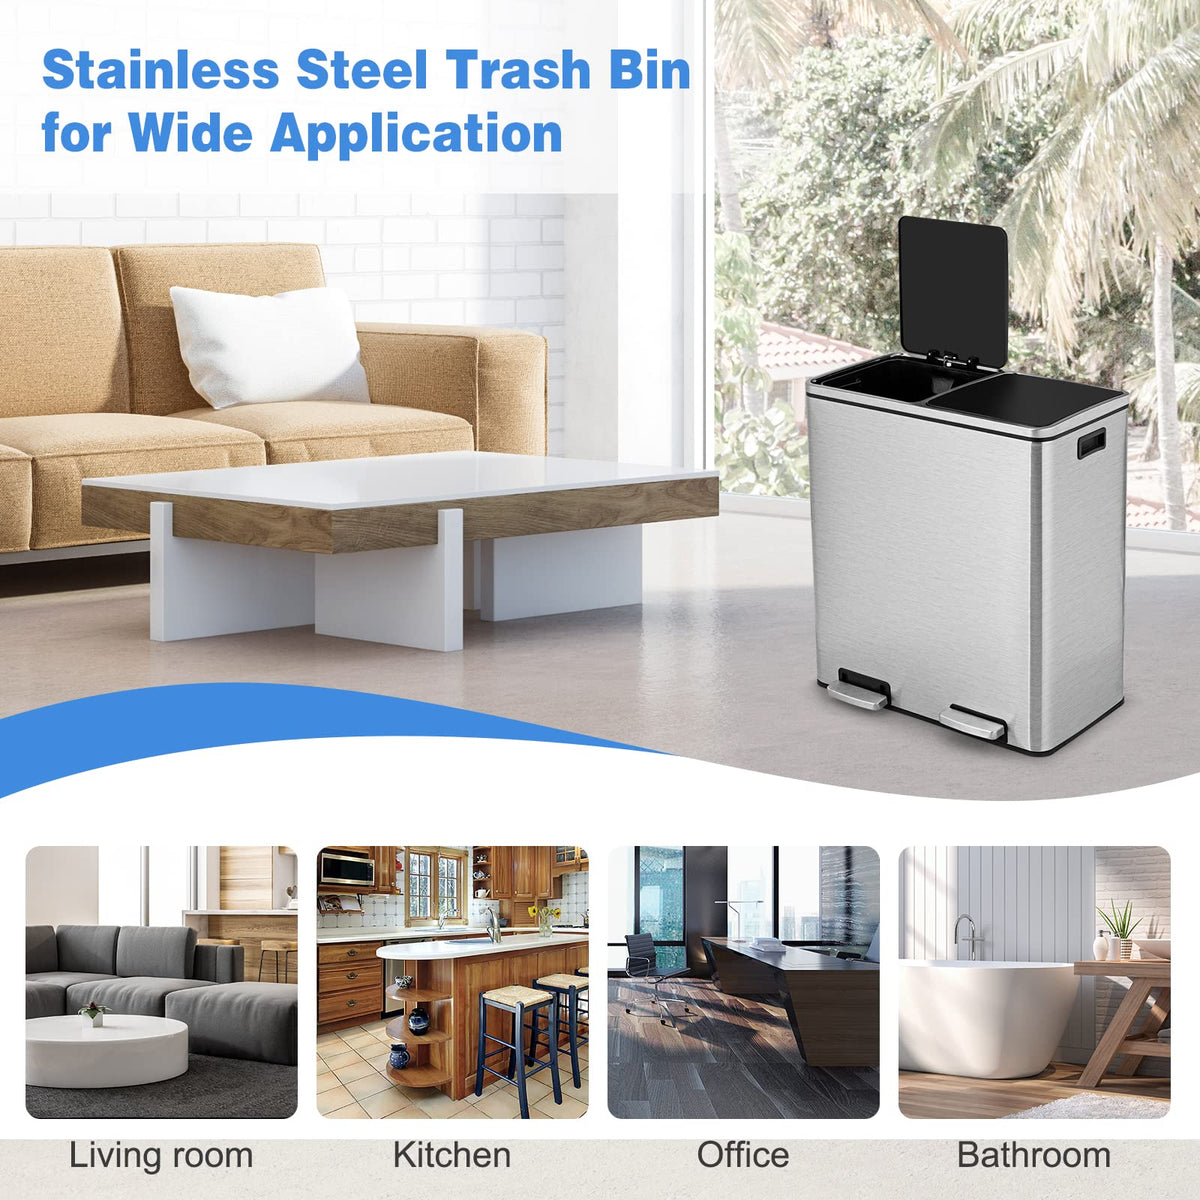 Giantex 60L Step Trash Garbage Can, Metal Step Trash Can, Stainless Steel Classified Recycle Garbage Pedal Dustbin